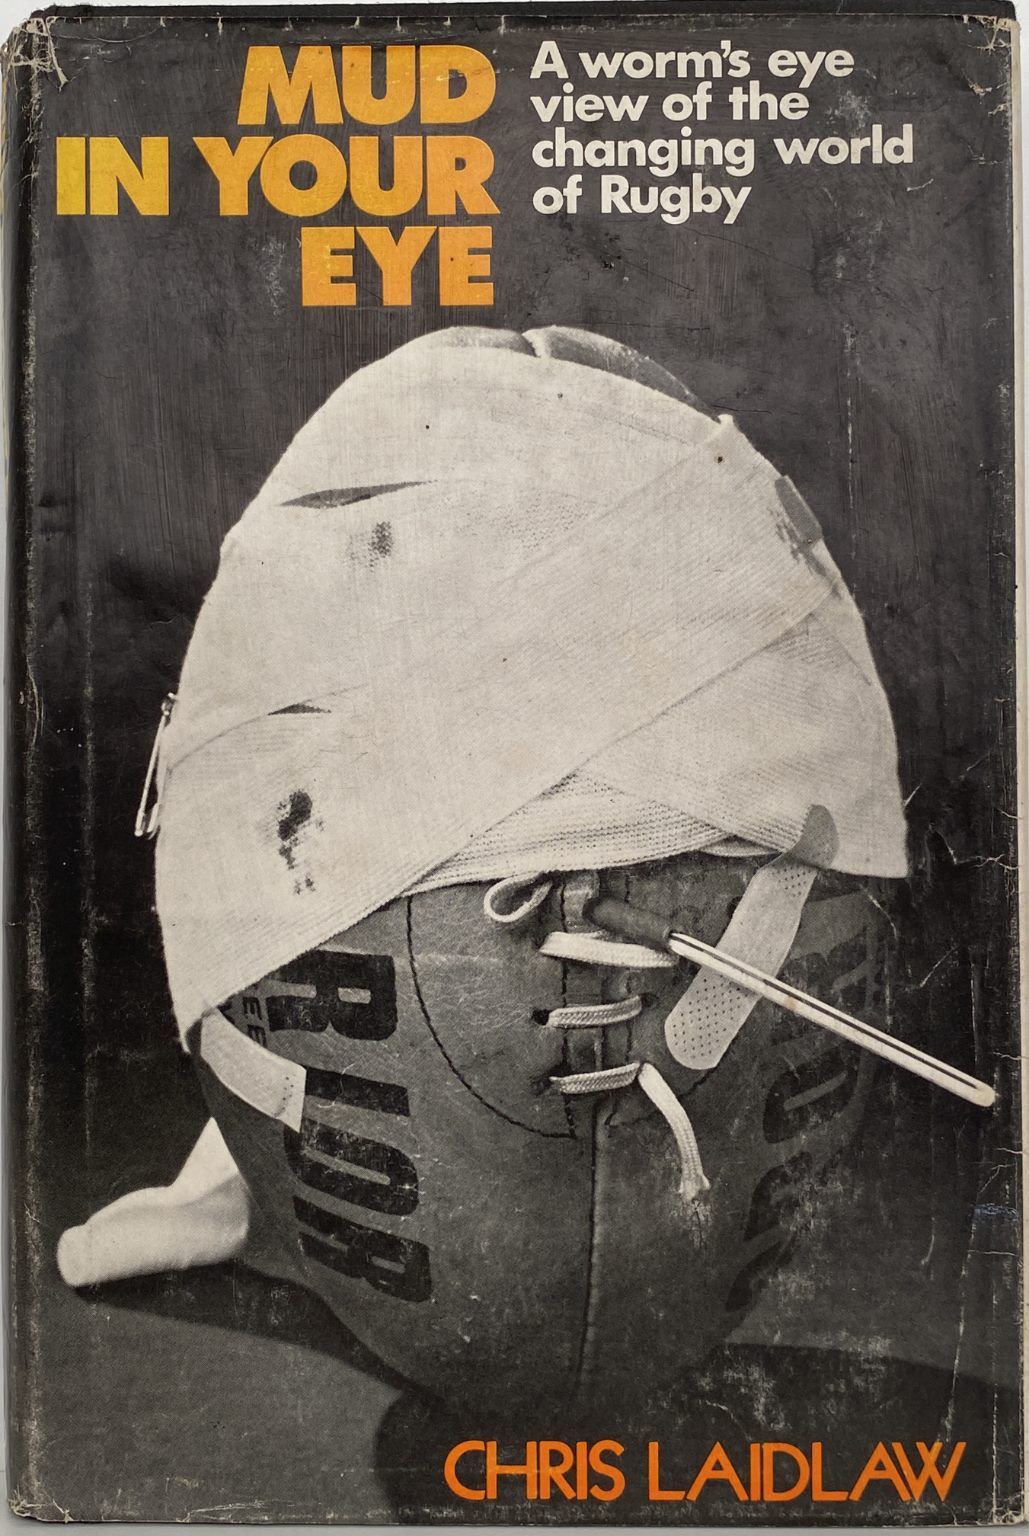 MUD IN YOUR EYE: A worm's eye view of the changing world of Rugby